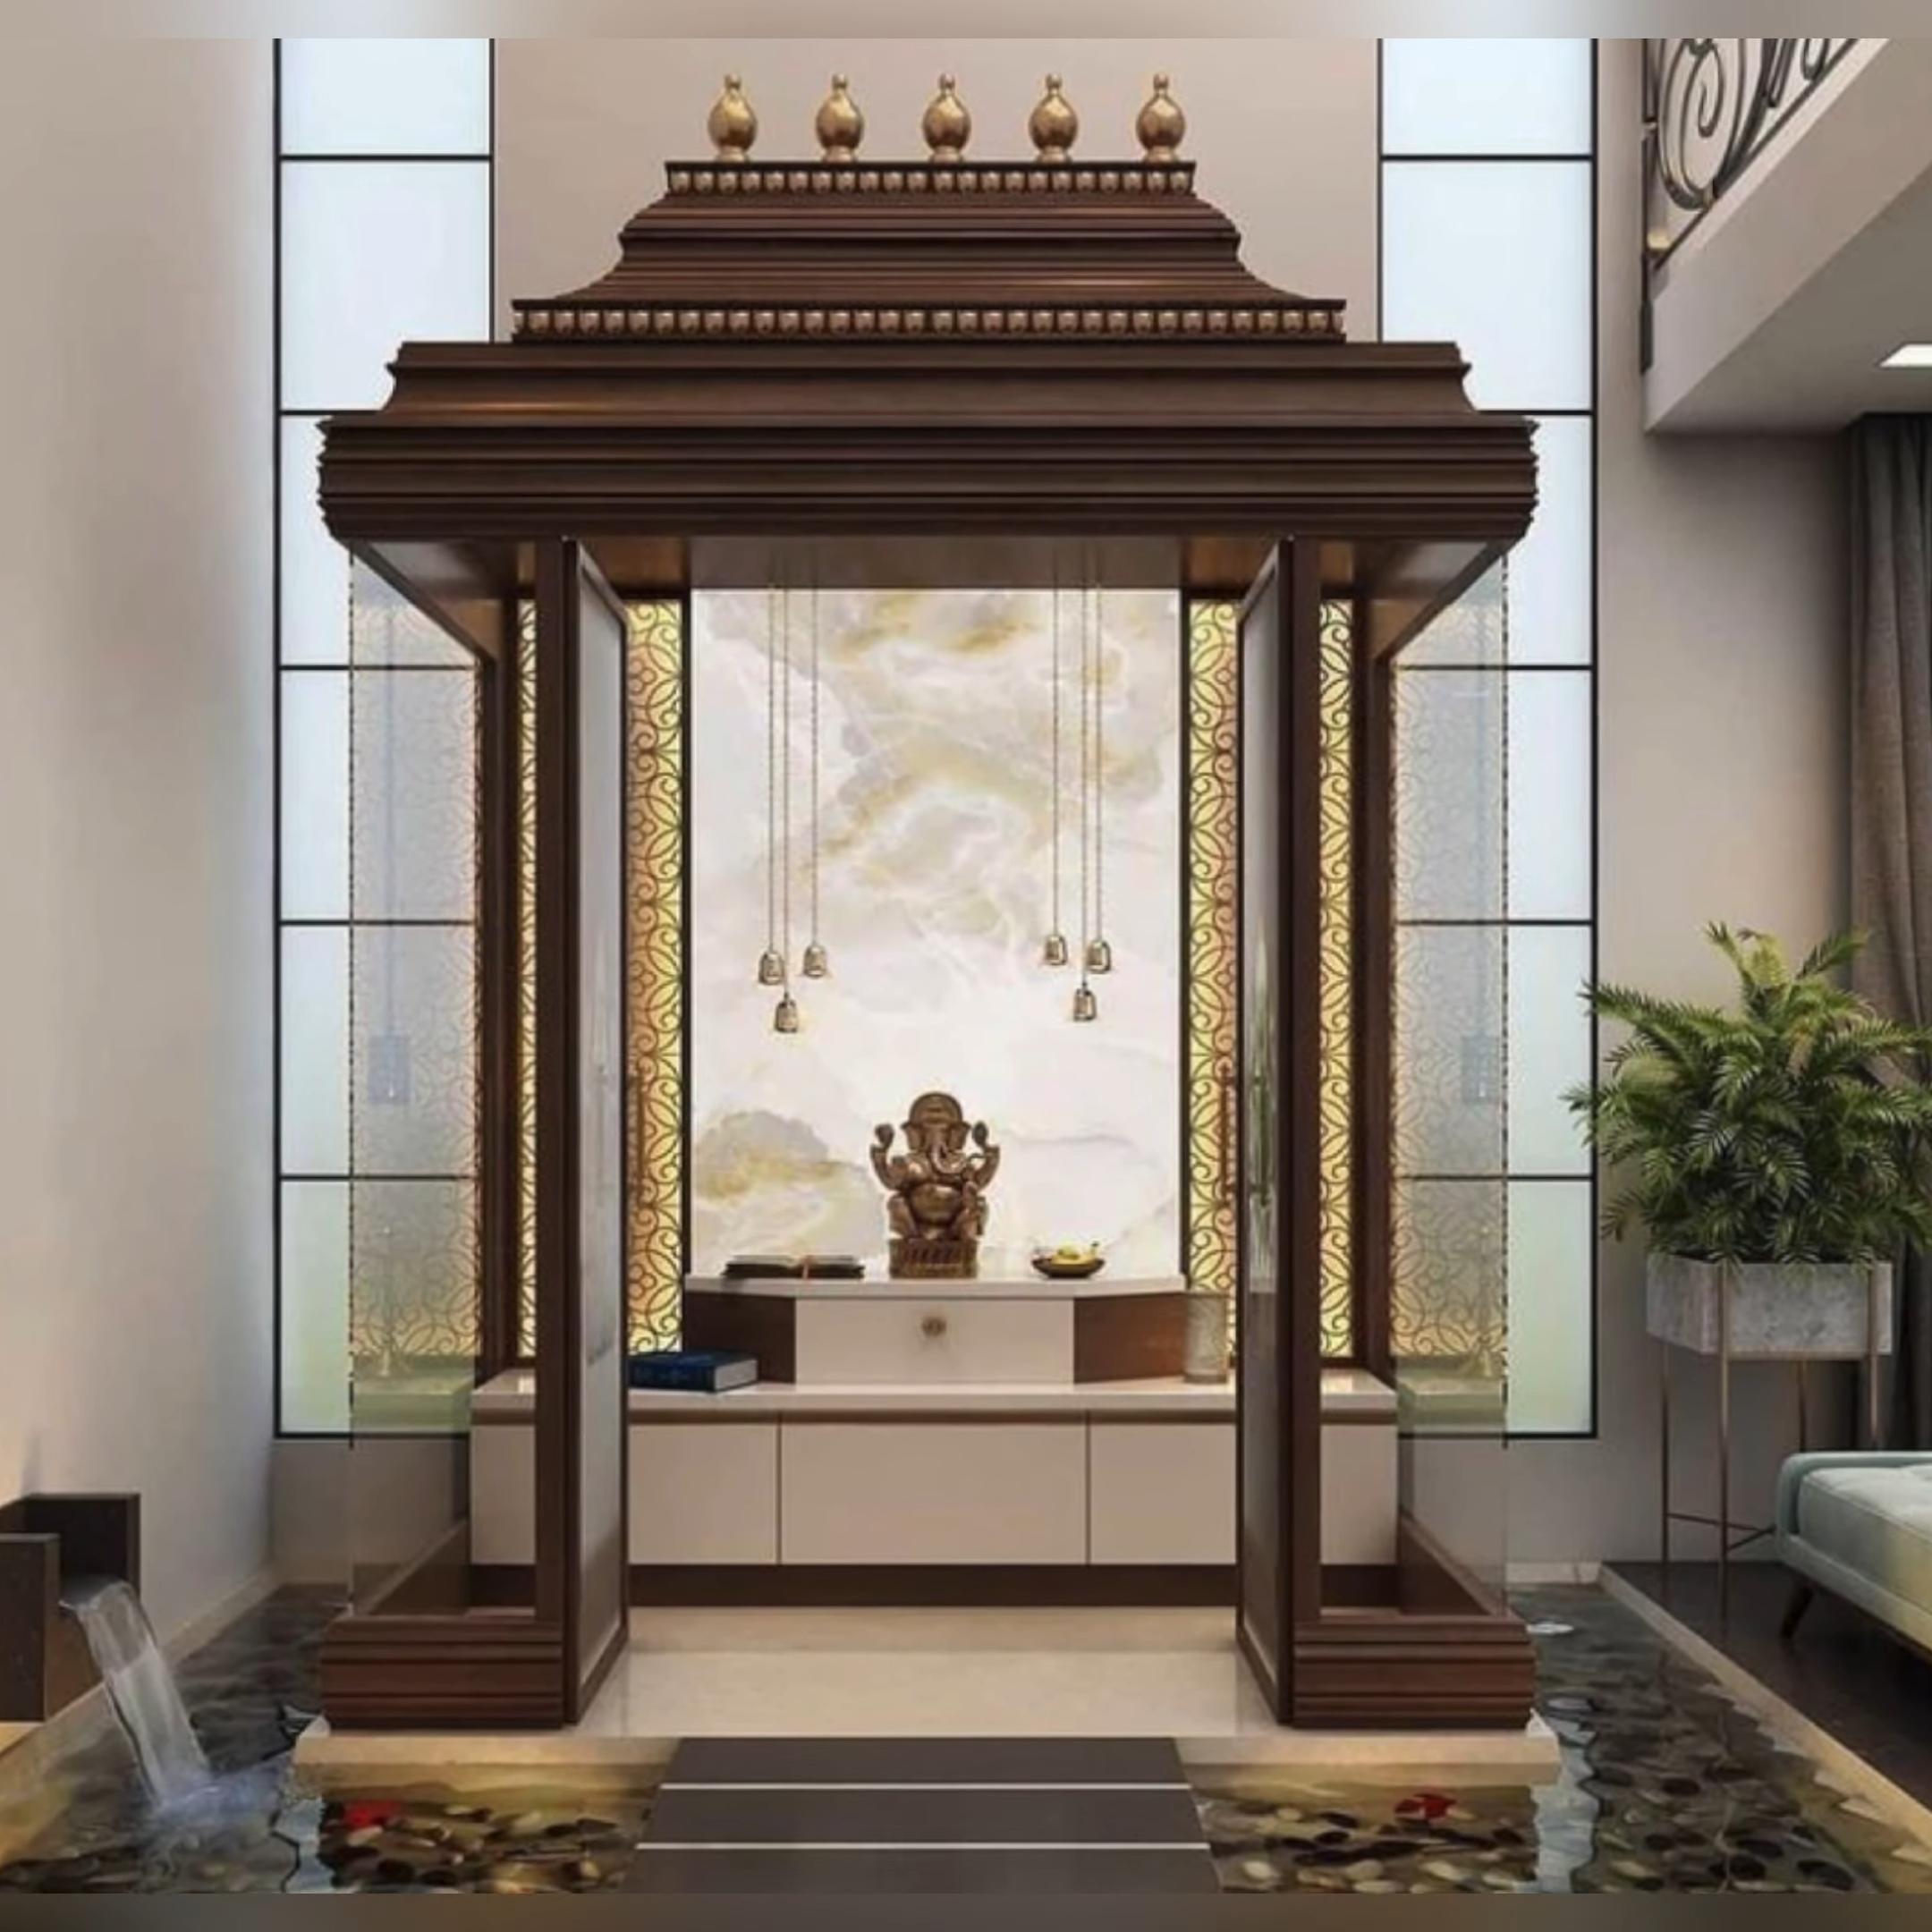 A photorealistic image of a beautifully crafted plywood mandir. The mandir should be adorned with intricate carvings and have a warm, inviting glow emanating from within.